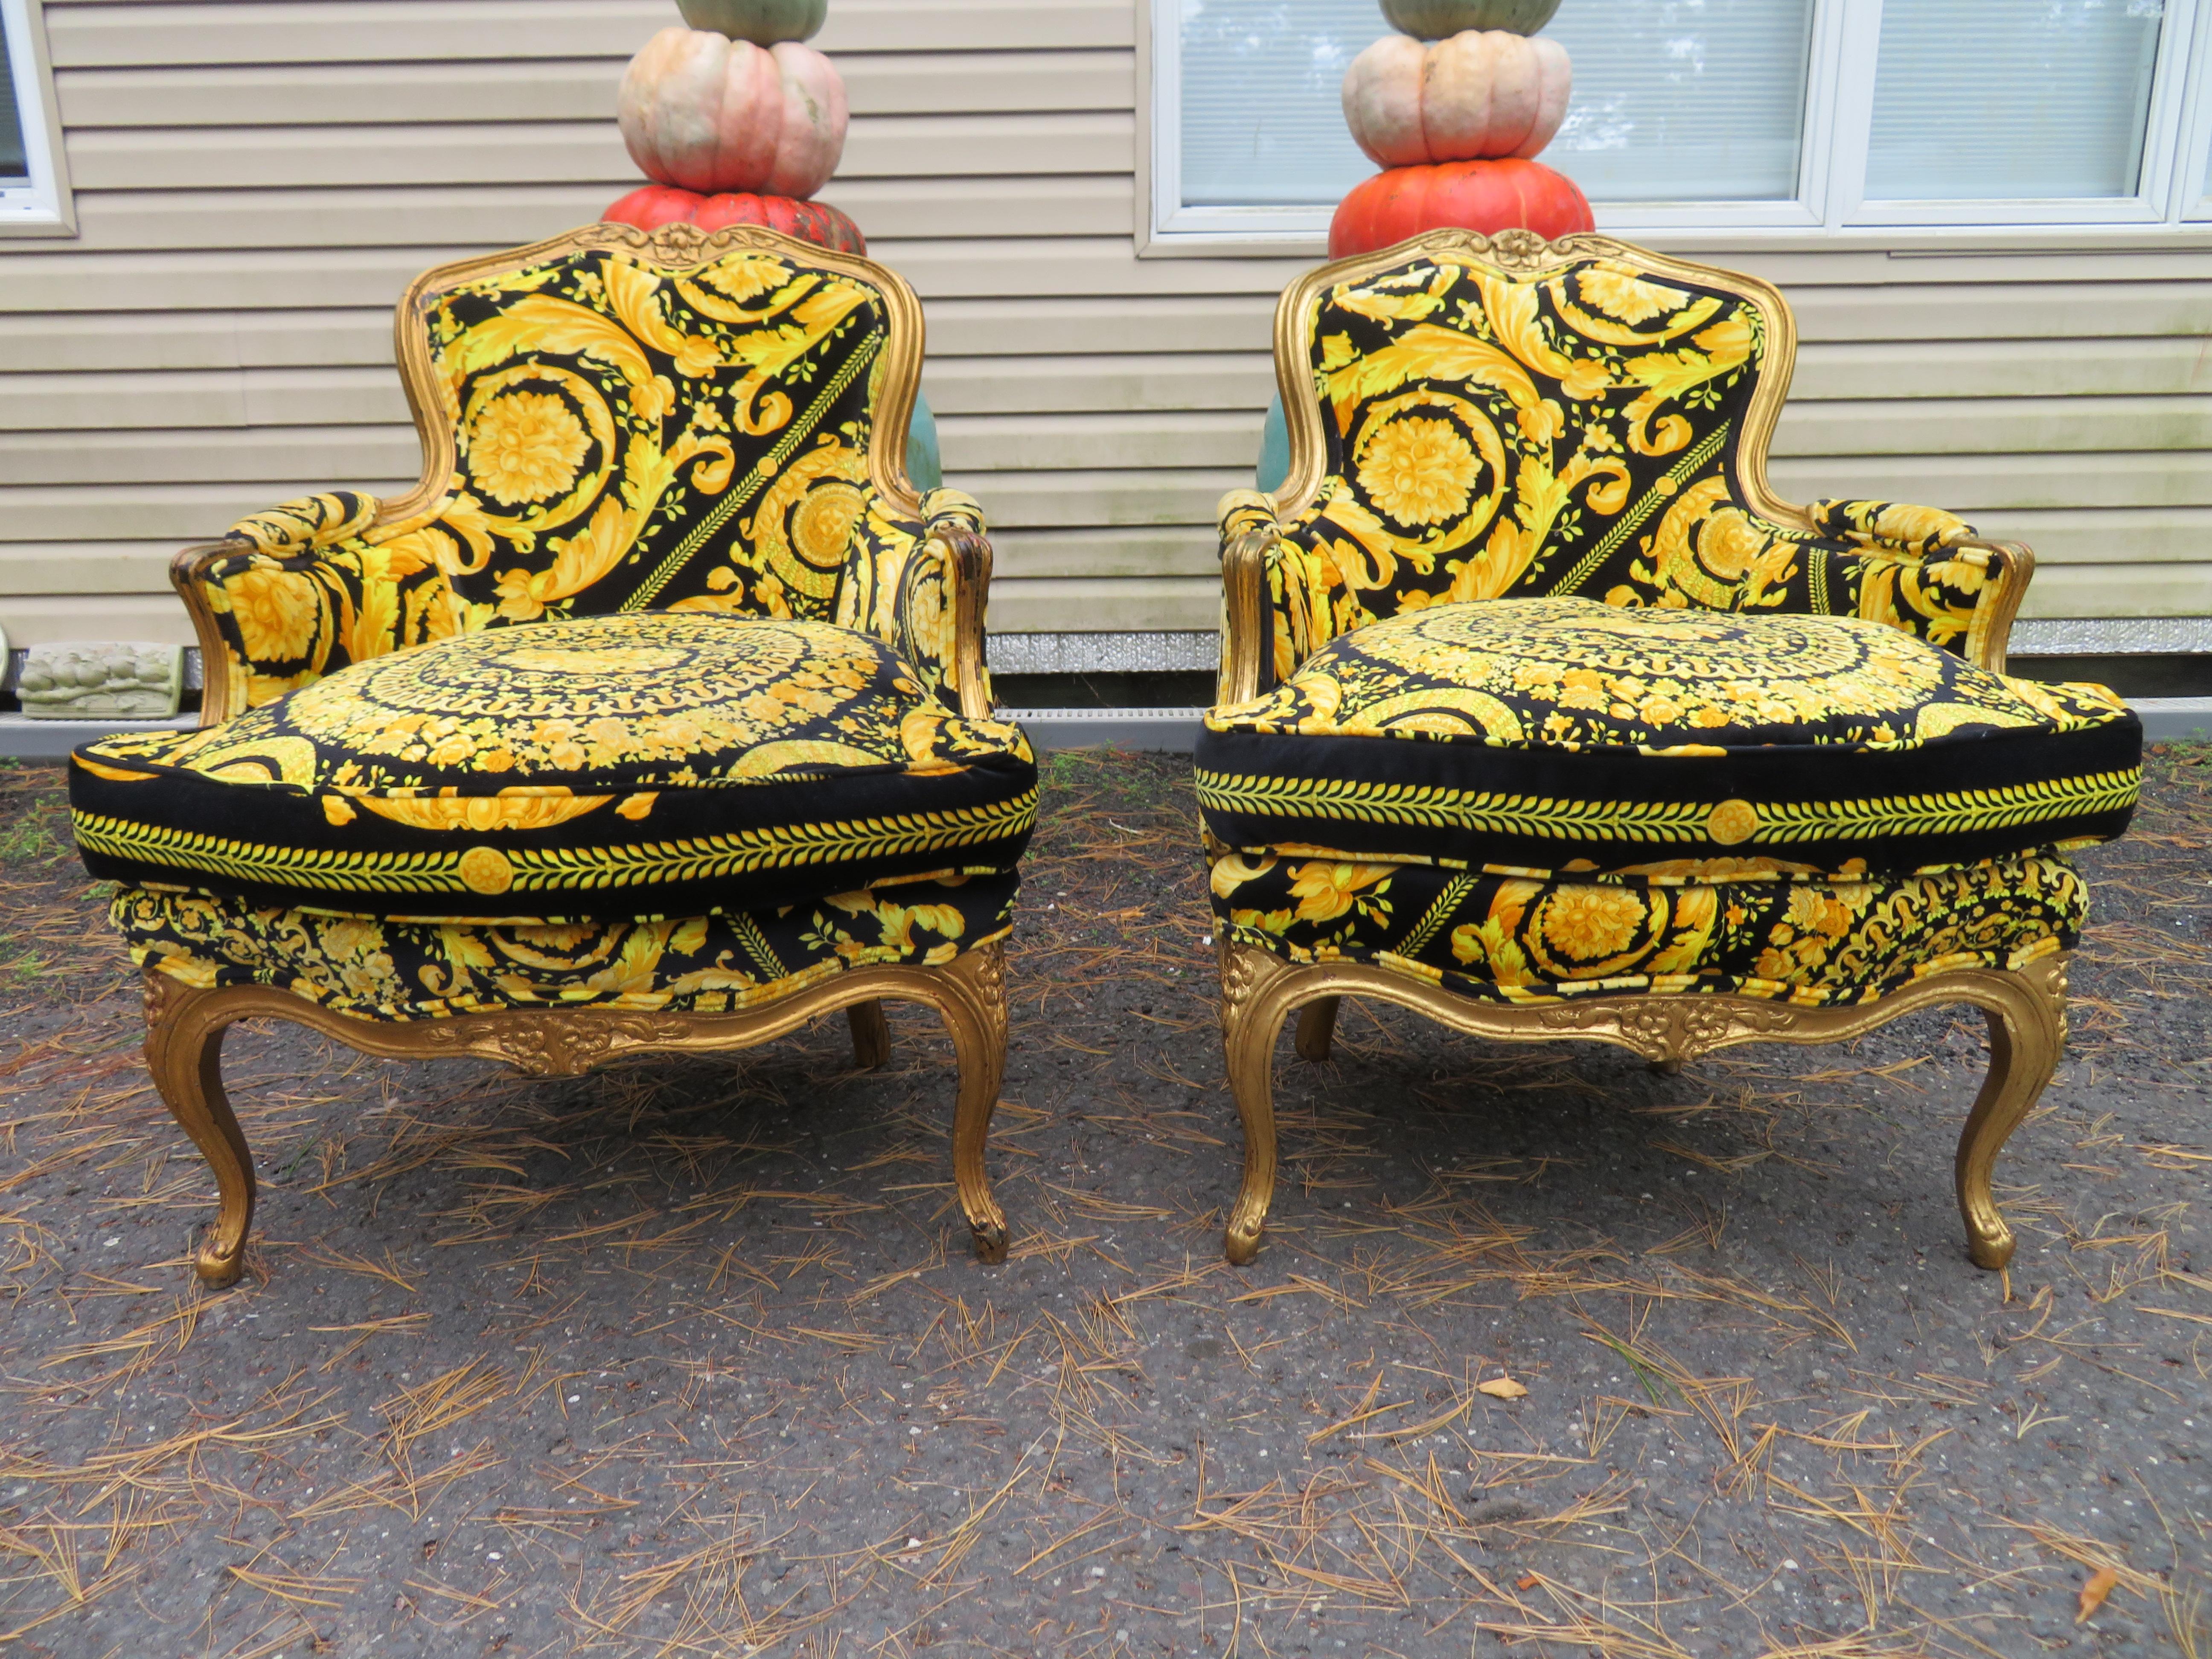 Magnificent pair of gilded French Louis 15th style carved chairs with custom Versace fabric. We absolutely love the gilded gold intentionally distressed finish along with the amazing Versace velvet fabric. These chairs measure 32